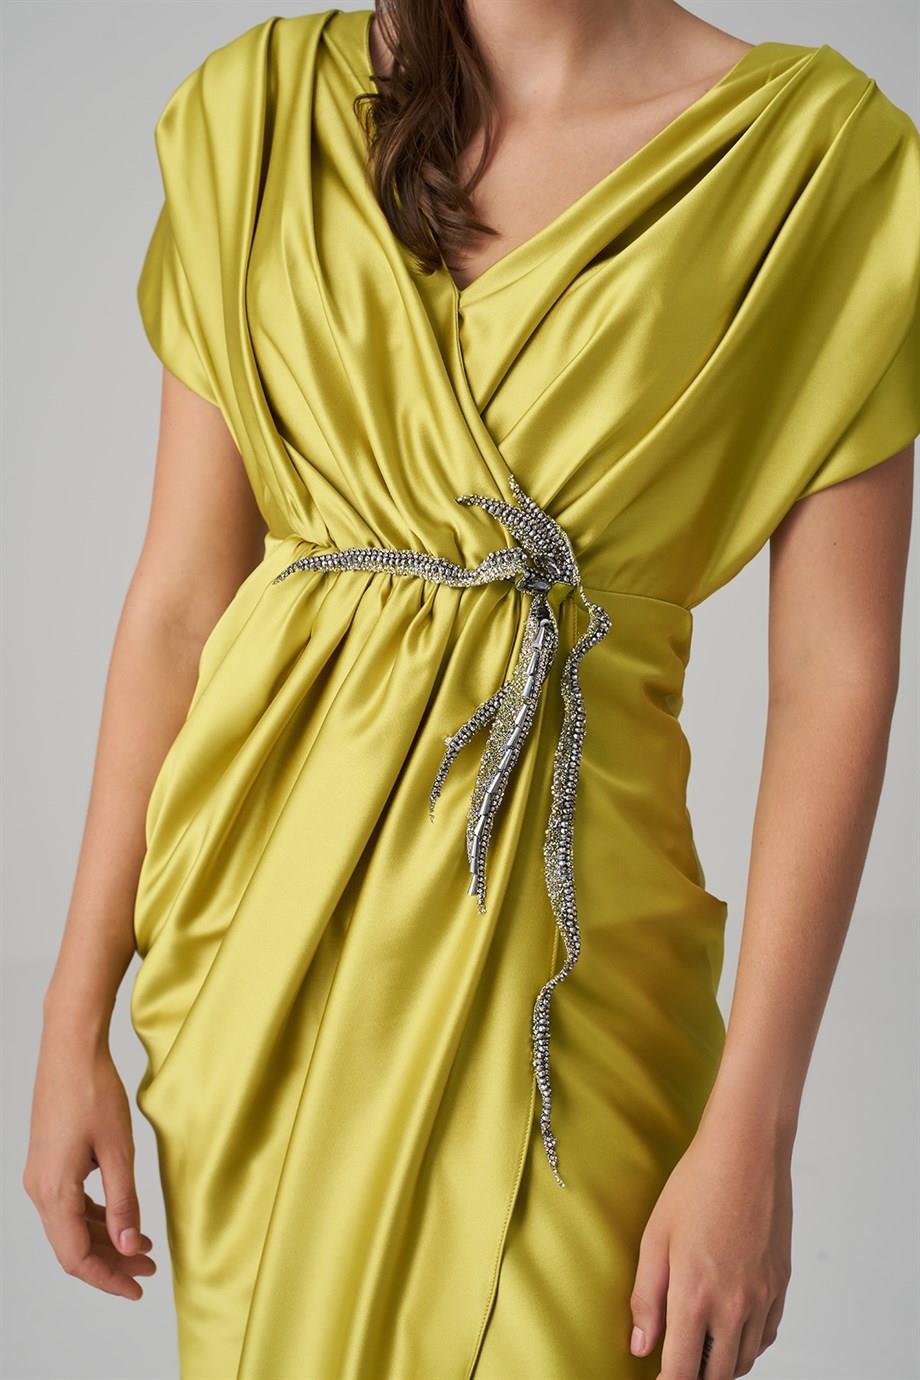 Picture of Fran Lime Satin Draped Dress